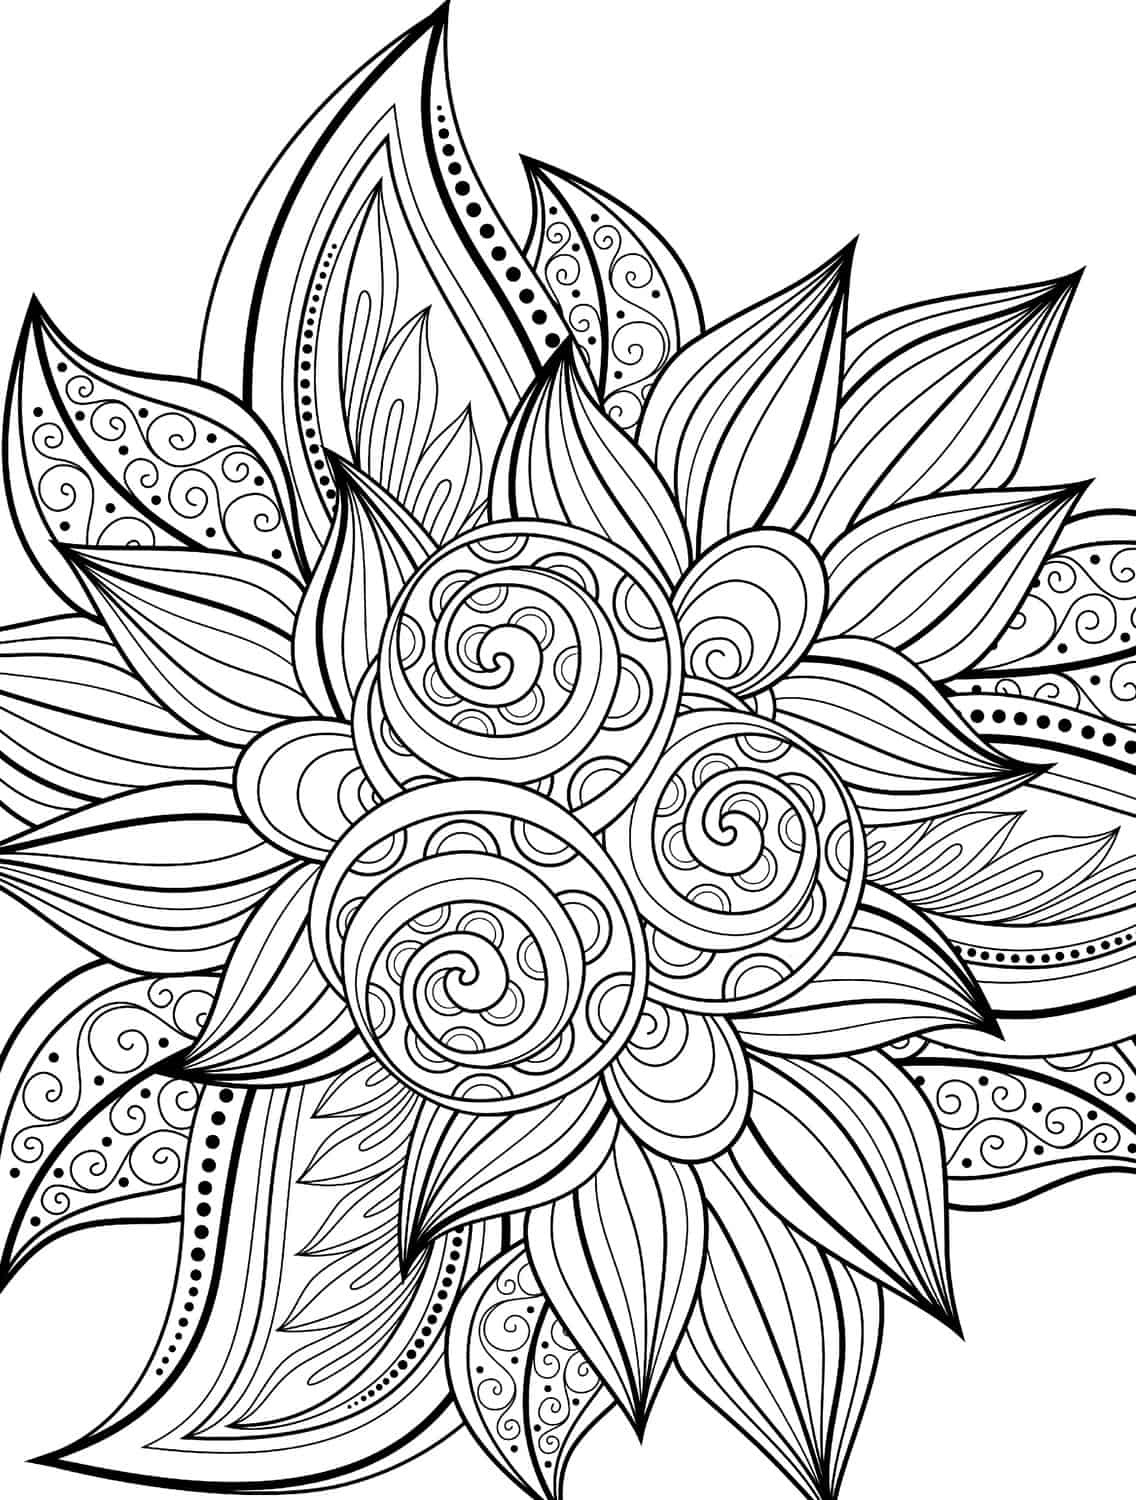 Awesome Coloring Pages Leaf